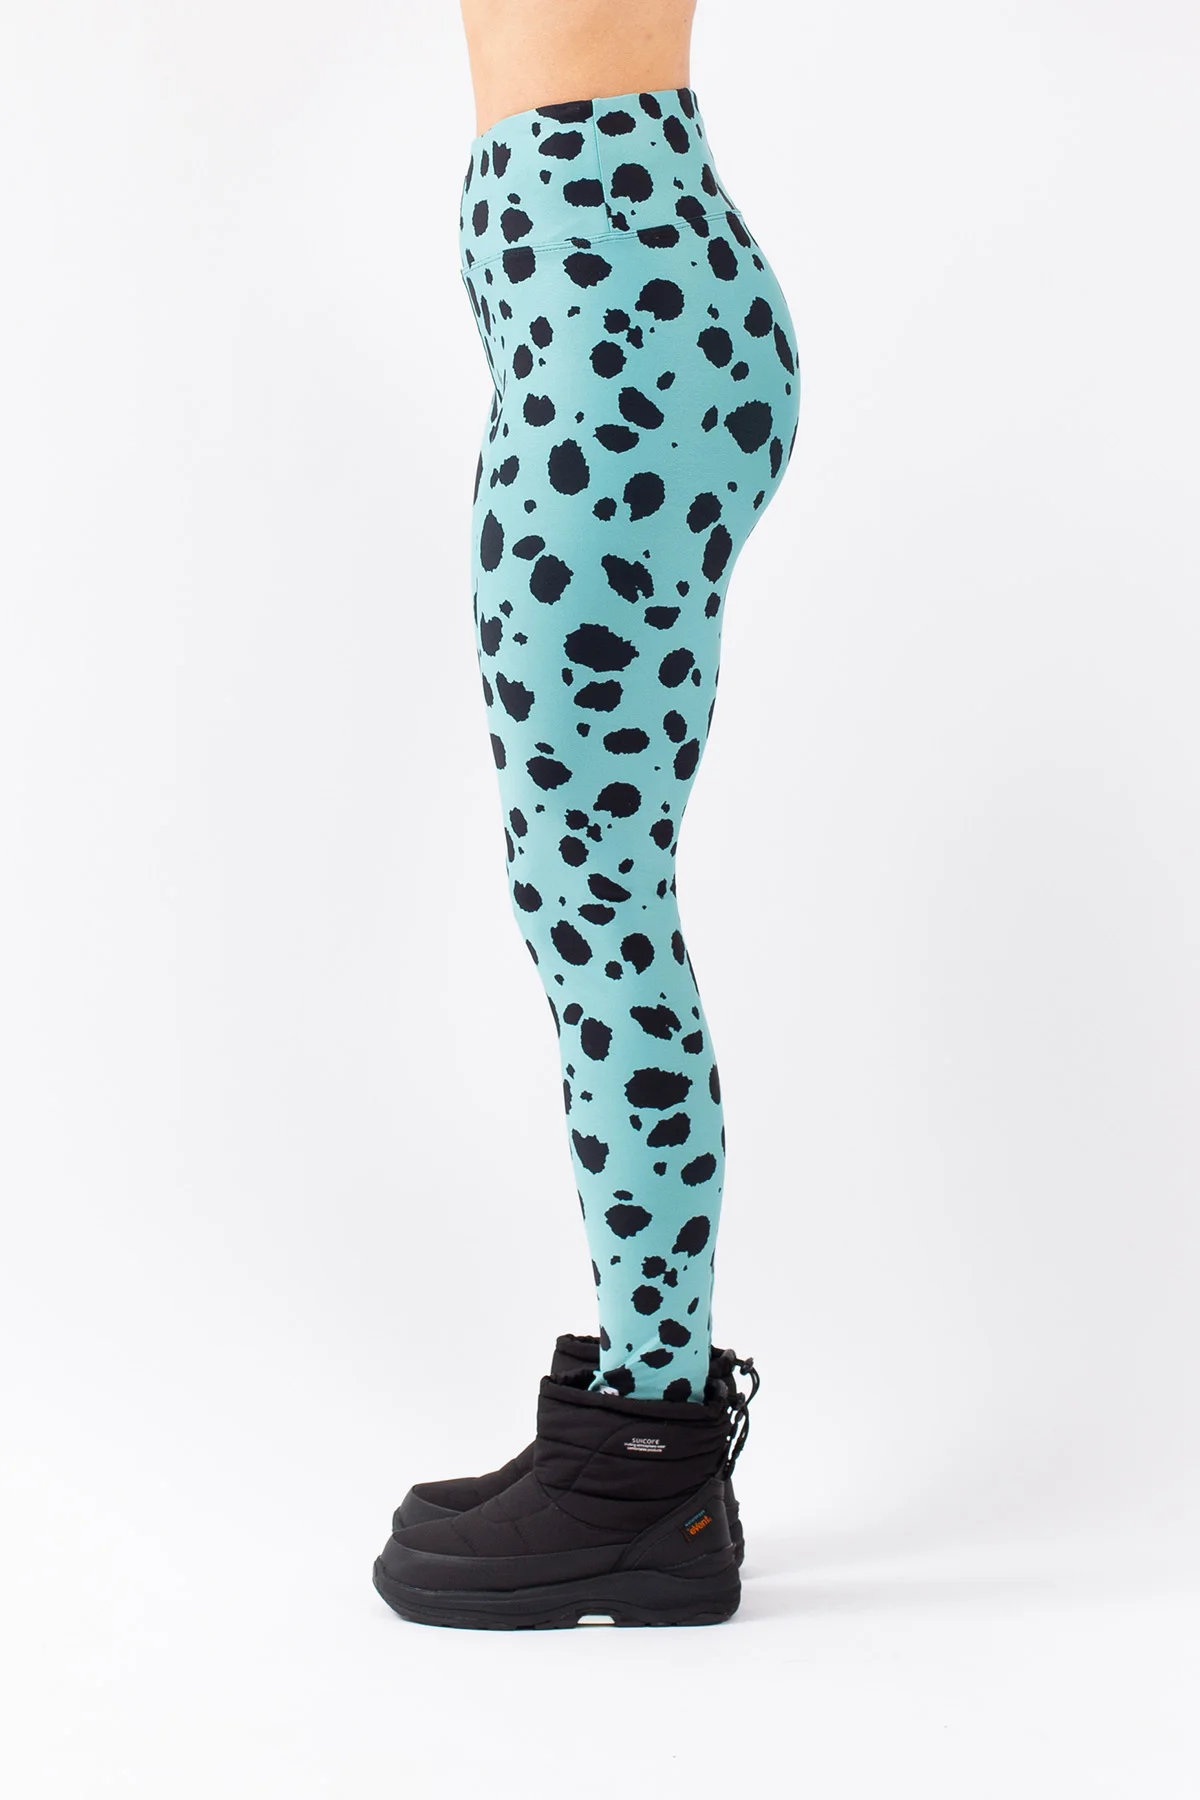 Icecold Tights - Turquoise Cheetah